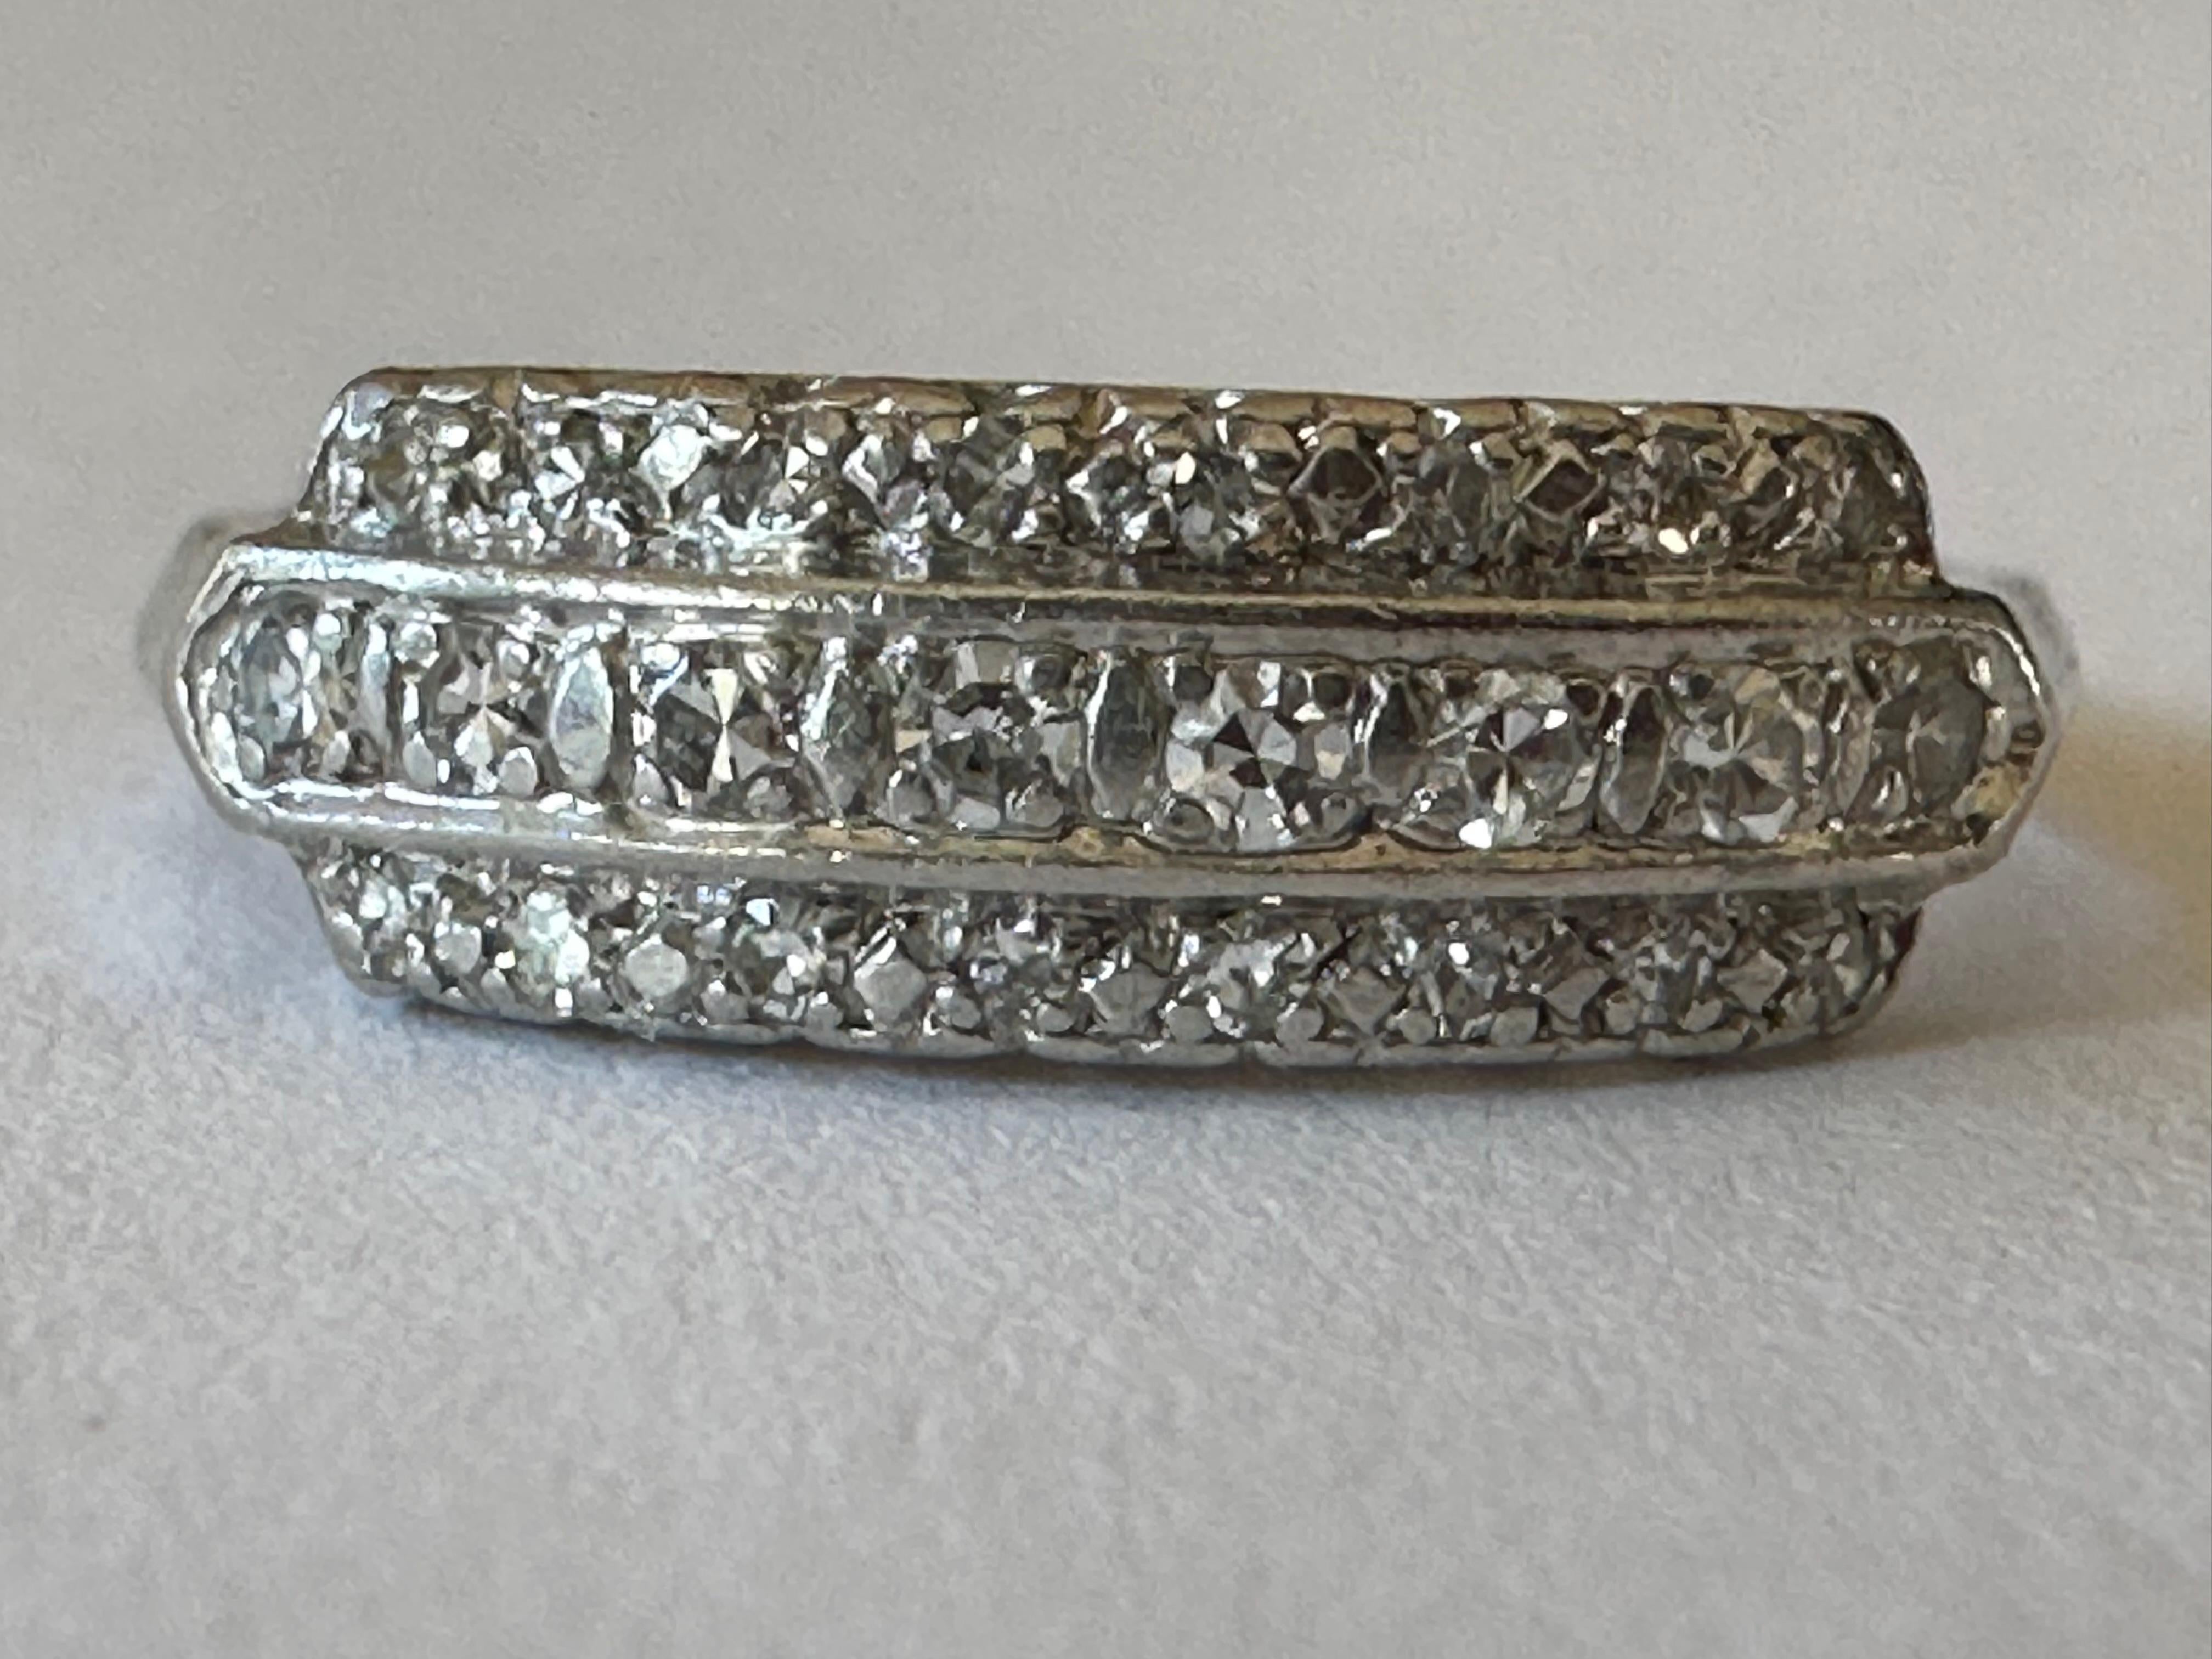 Three rows of twenty-four closely set bright-white single-cut diamonds, together weighing approximately 0.50 carats, F color, VS clarity, shimmer across the top half of this classic, gently domed band ring. Crafted in platinum. Circa 1920s. 